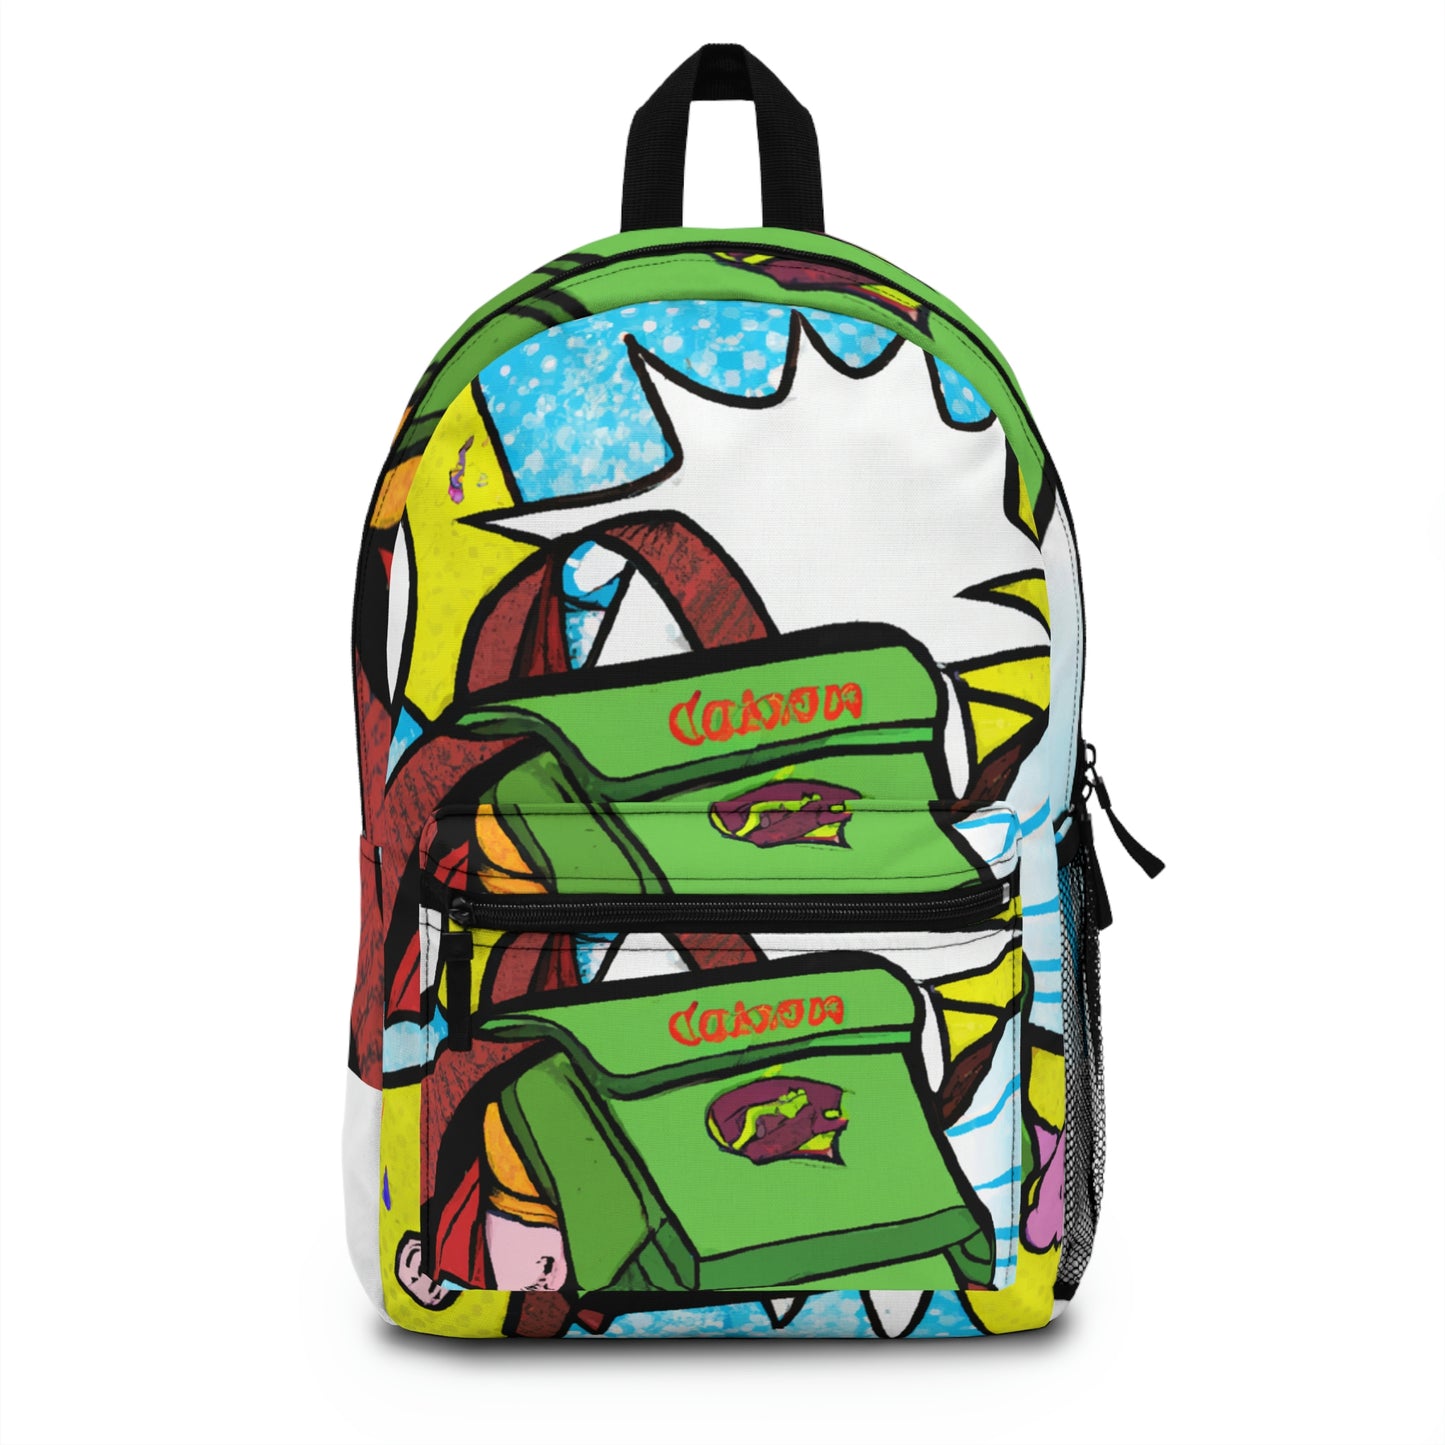 Captain Spectacle - Comic Book Backpack 1 of 1 Collectible